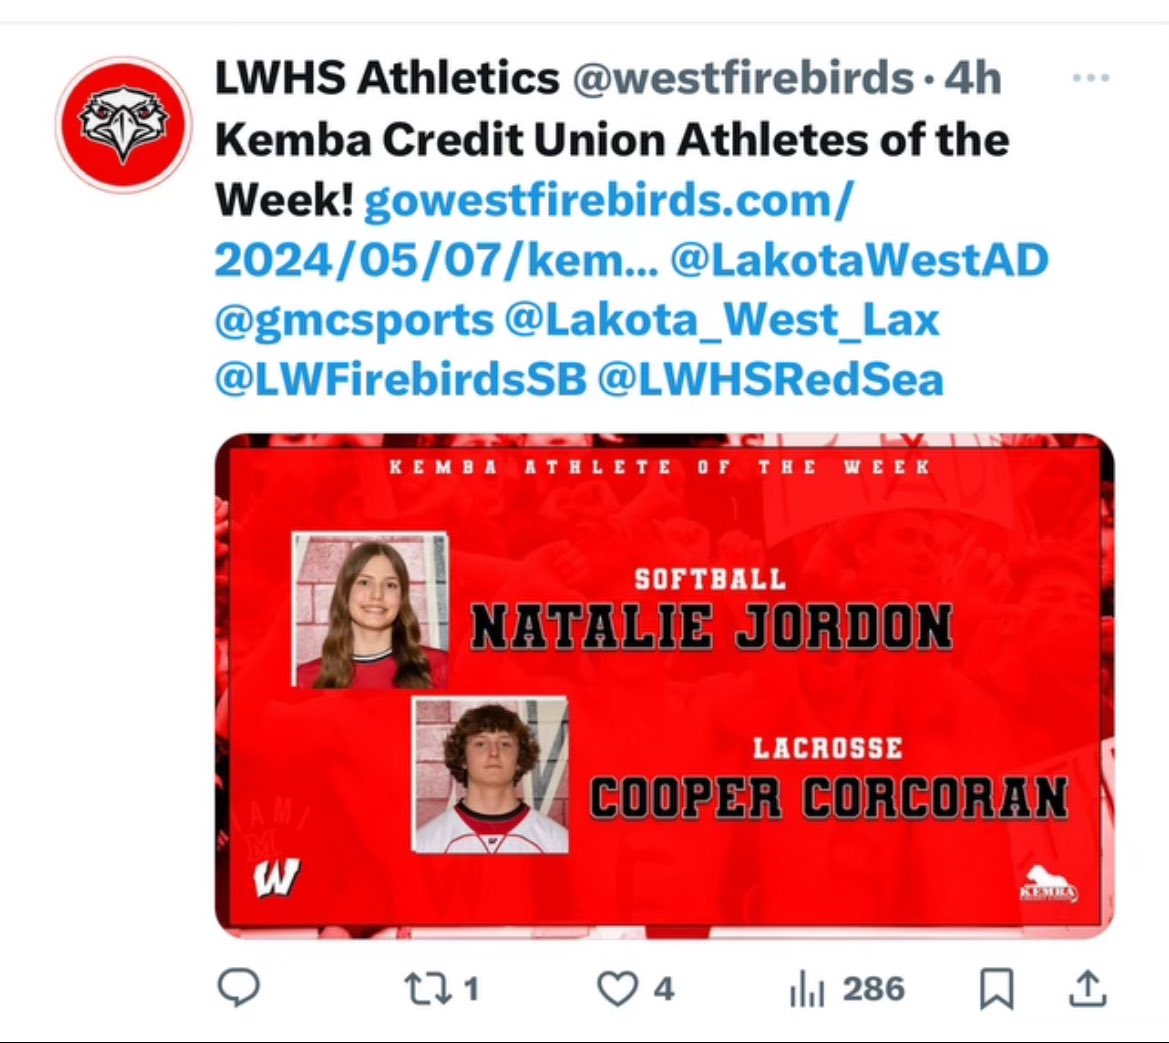 Check this out!!! Congratulations to Cooper Corcoran on being recognized as Kemba Credit Union Lakota West Athlete of the Week. Cooper crushed it this past week earning: -9 goals -2 assists -6 ground balls -2 caused turnovers Congratulations Cooper, keep working and killing it!